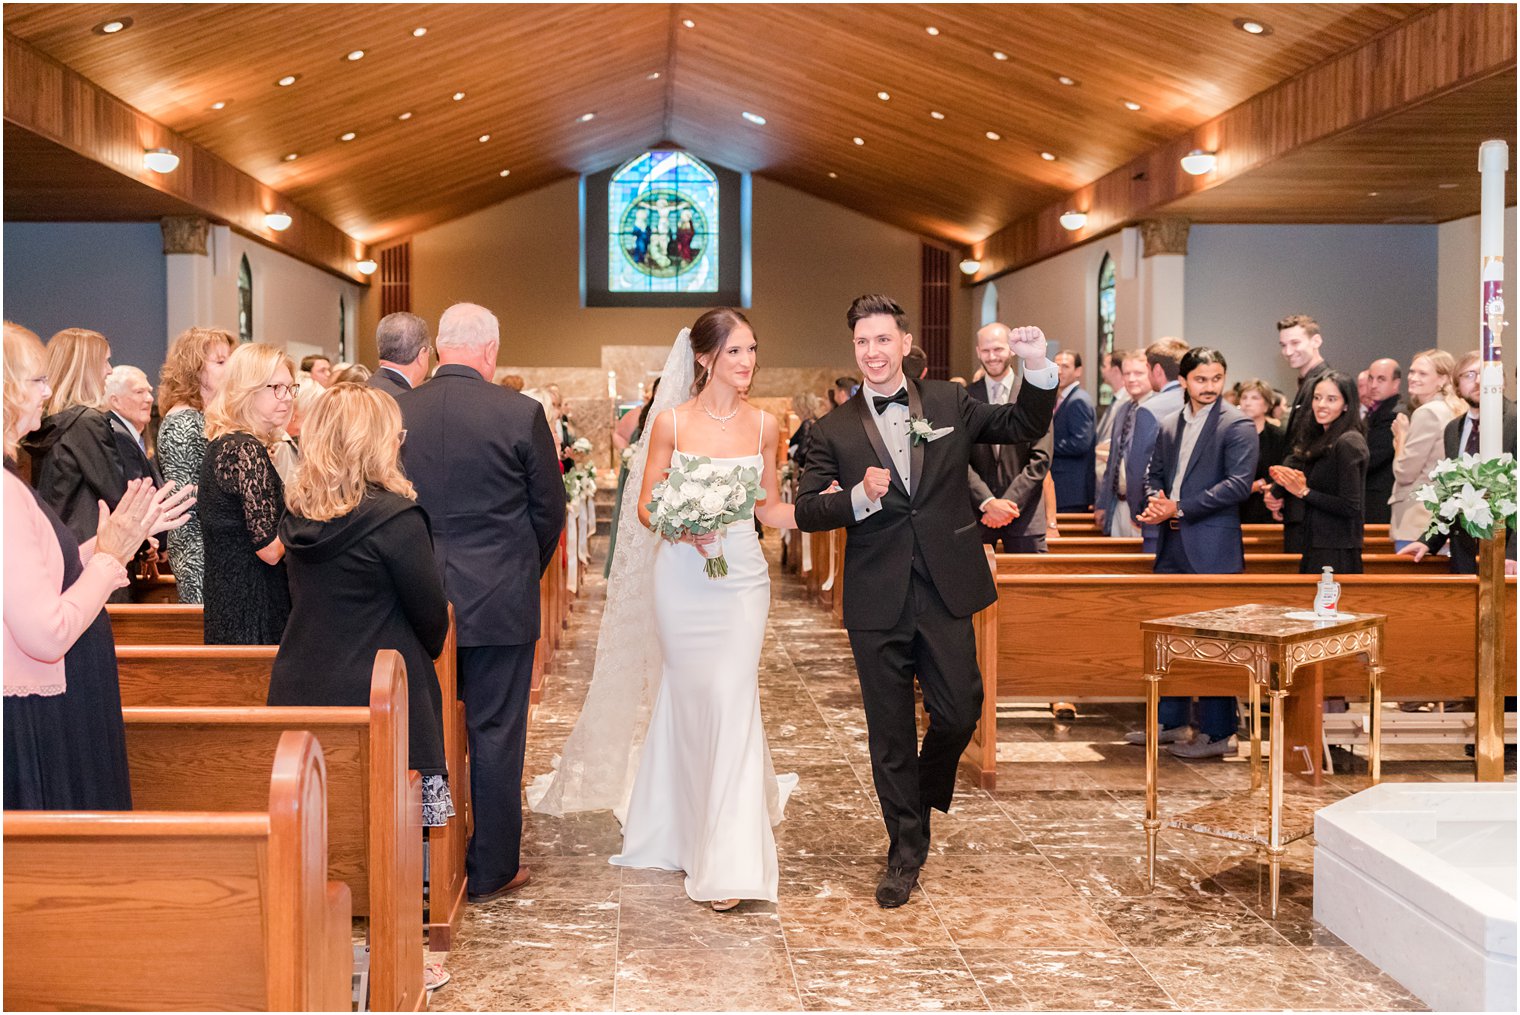 newlyweds cheer leaving traditional church ceremony in small New Jersey church